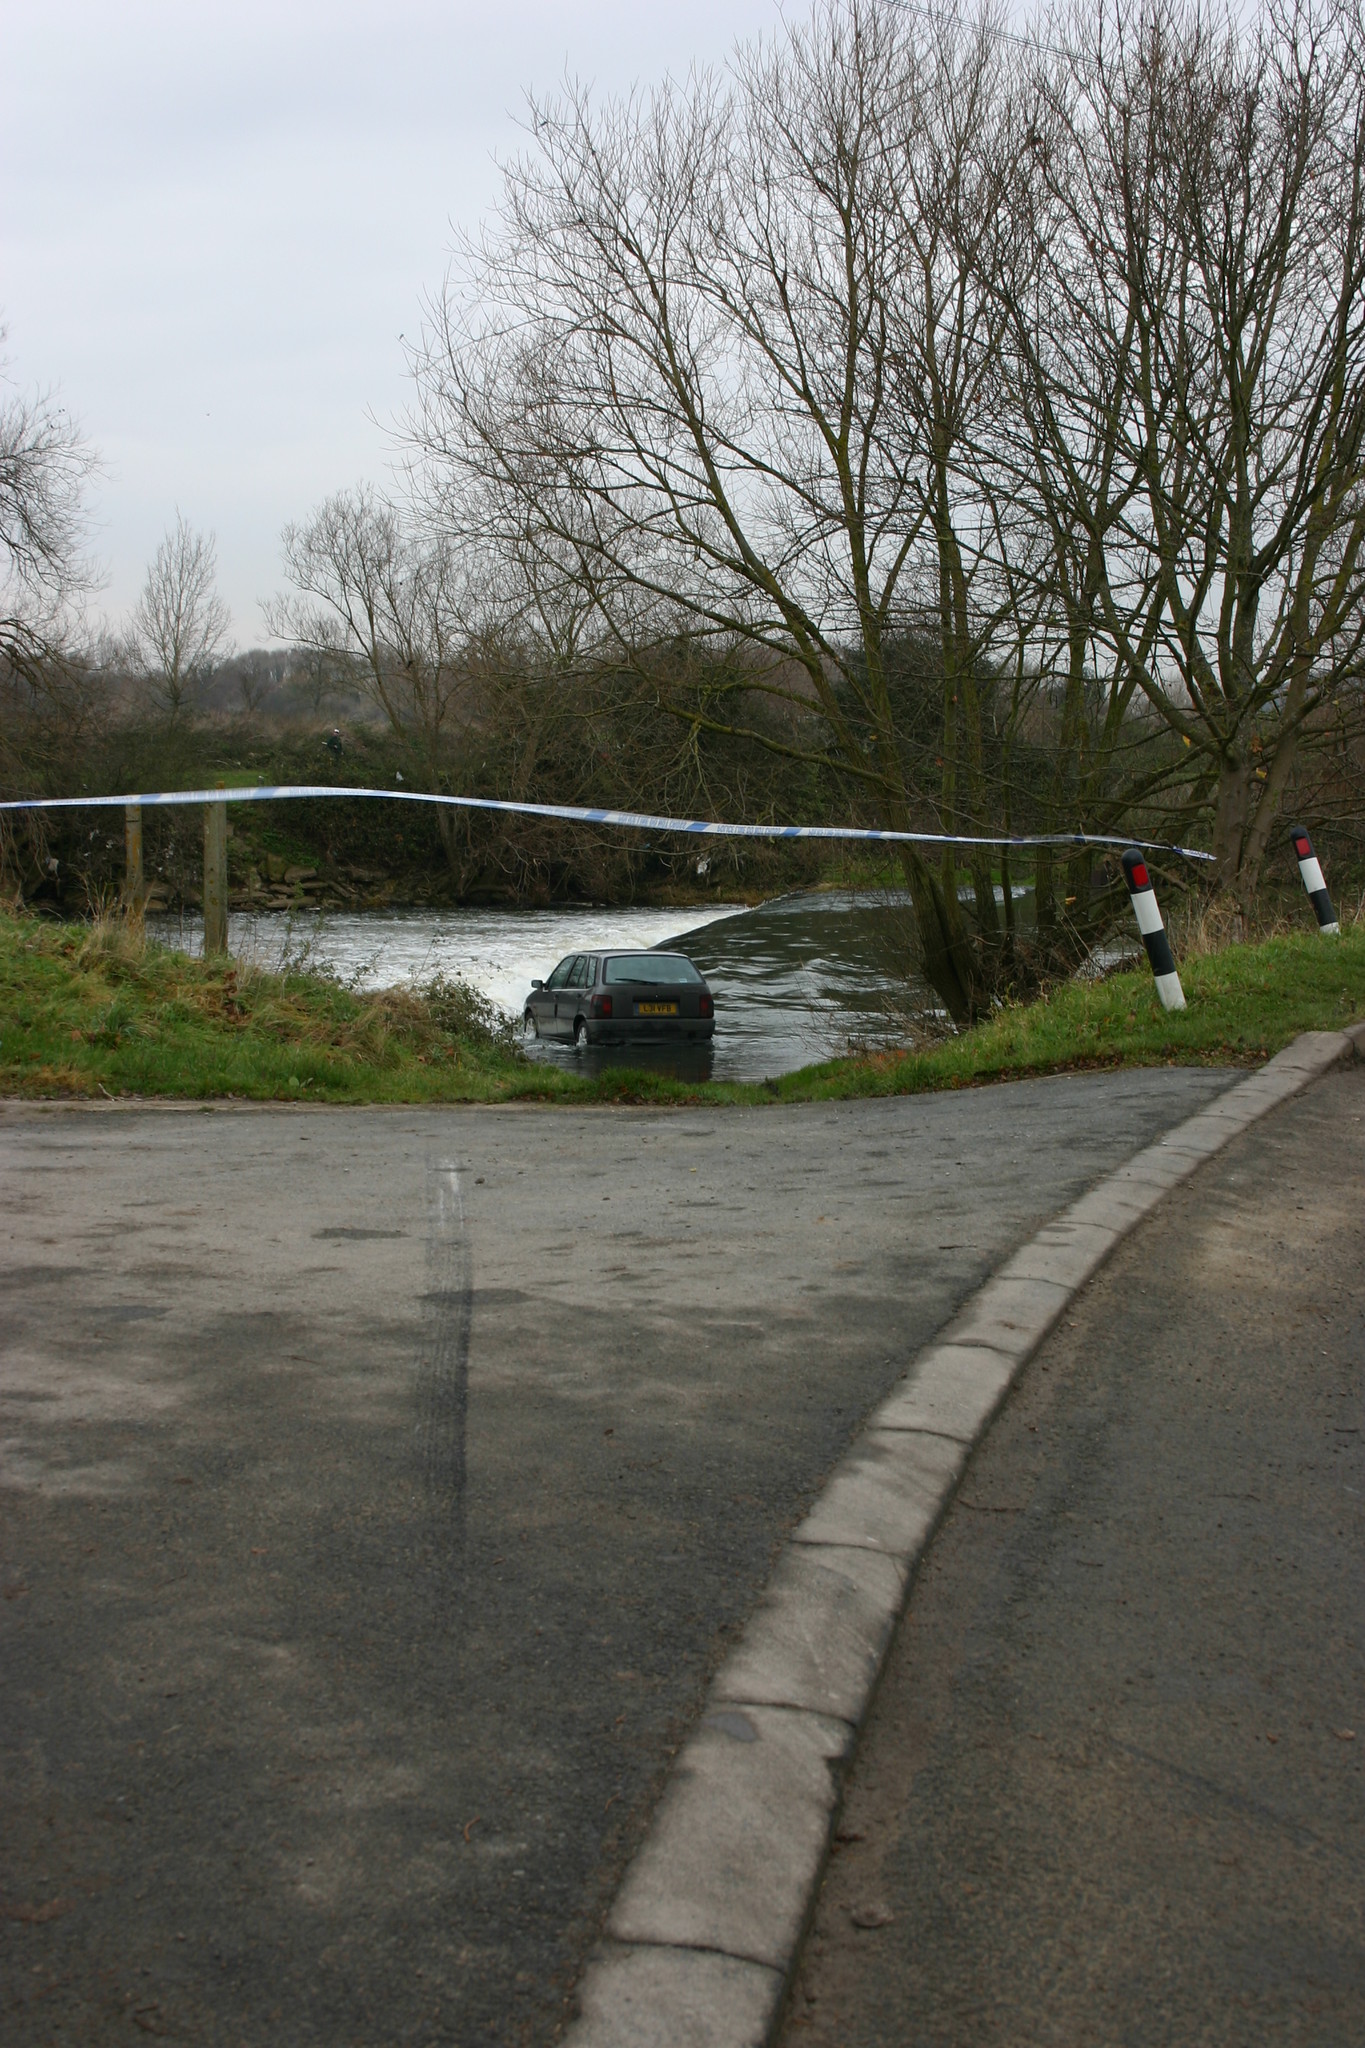 Car accident involving water; image by Jon Whitton, via Flickr.com, CC BY-NC-ND 2.0 Deed, no changes.